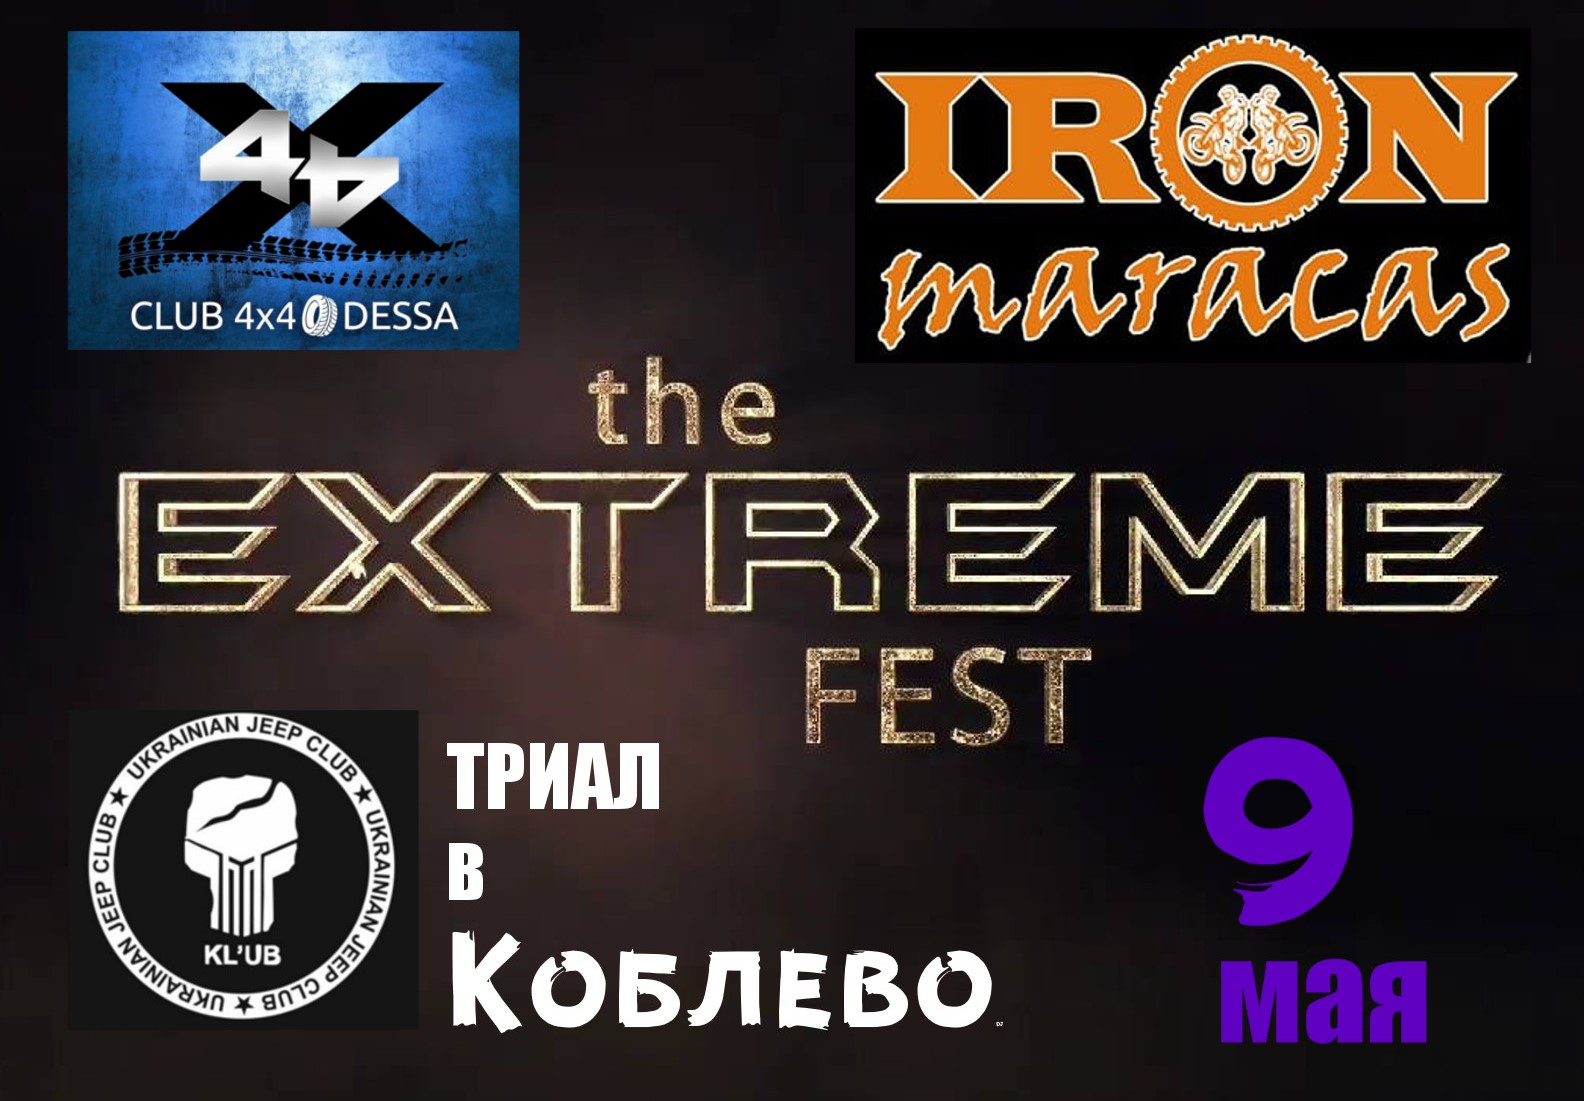 The EXTREME Fest